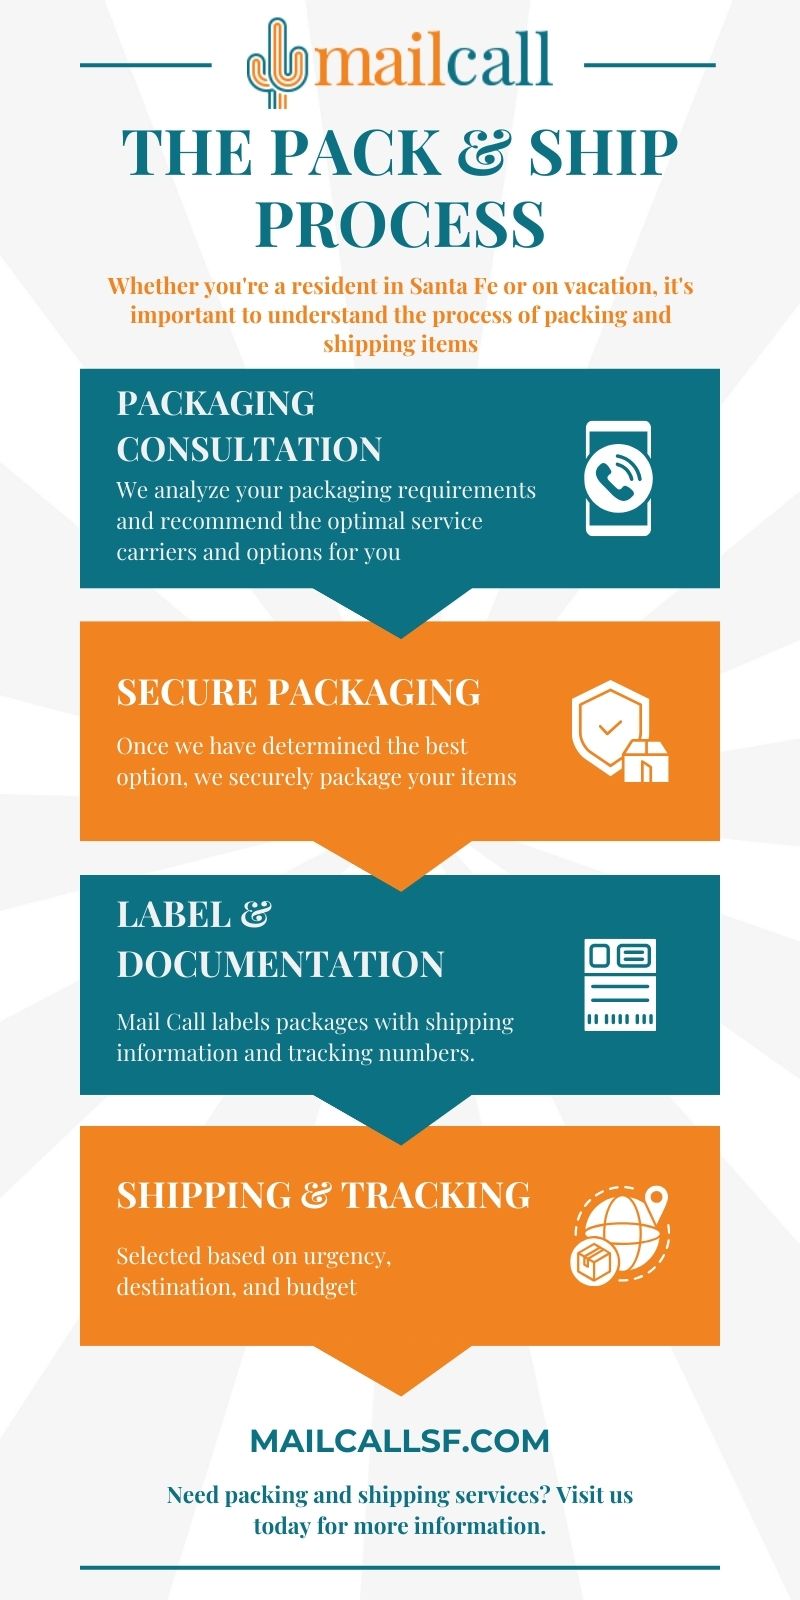 The Pack & Ship Process infographic